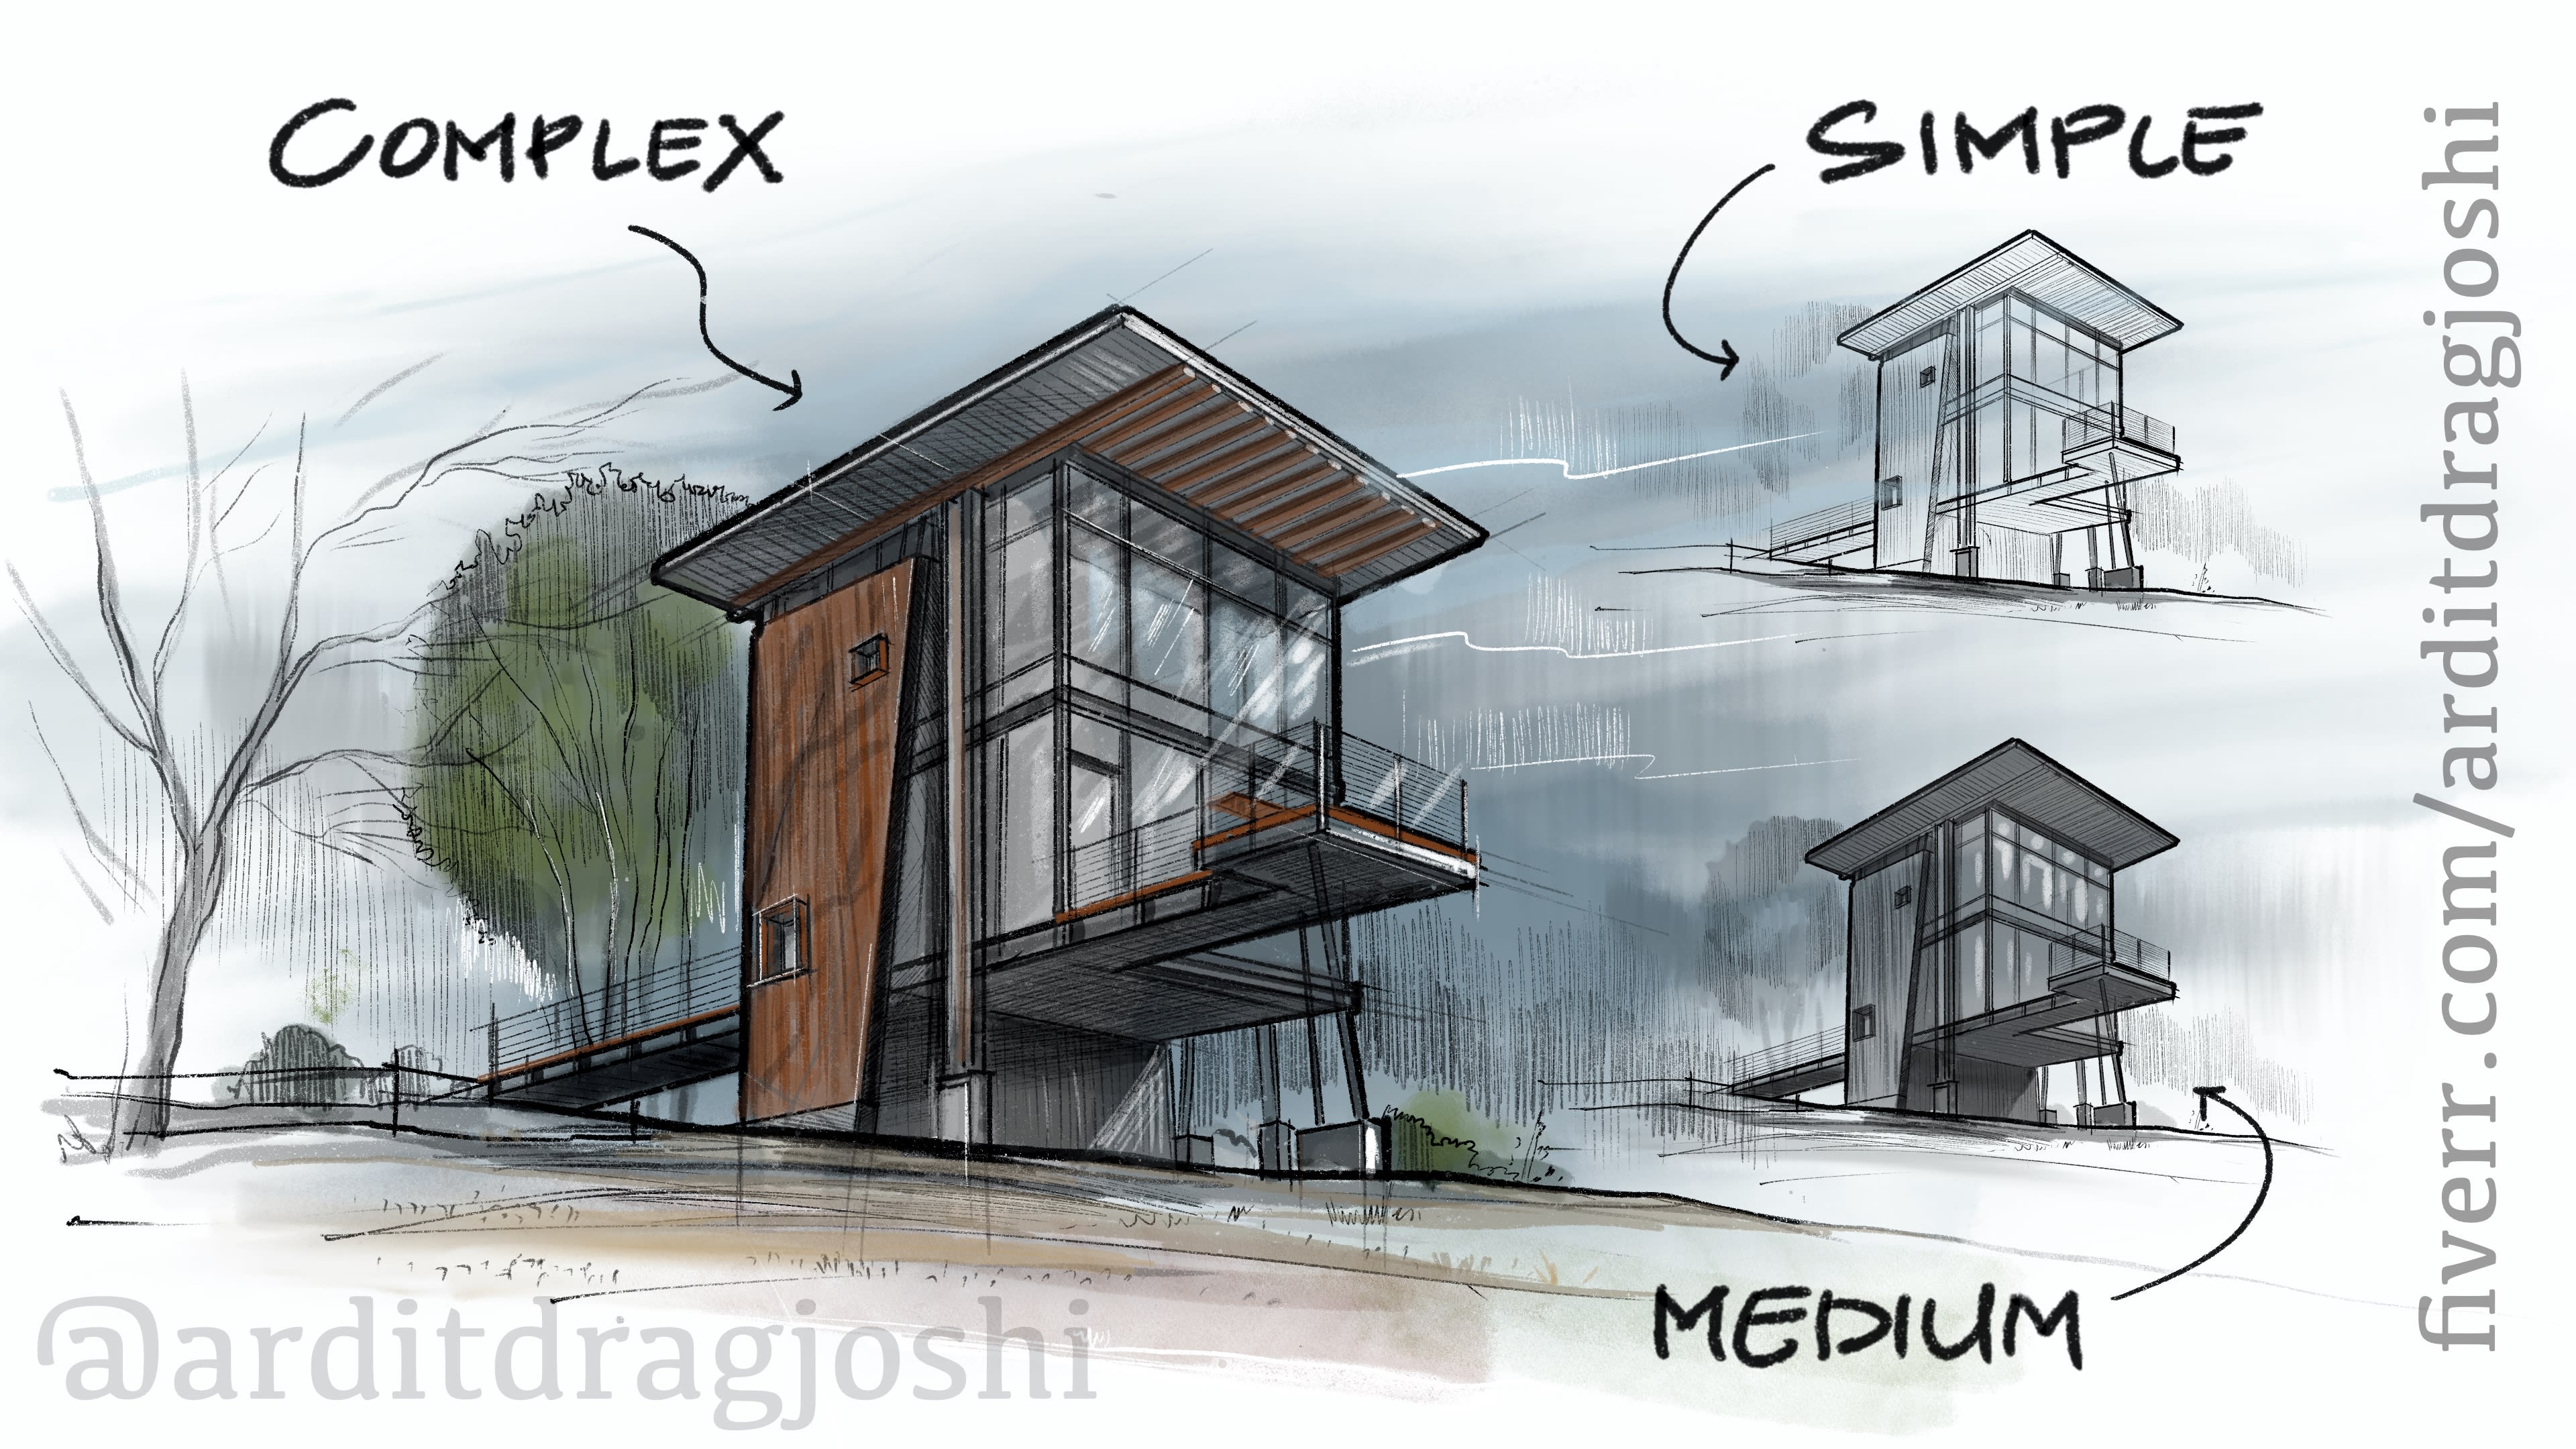 Complete structural design drawings of a reinforced concrete house